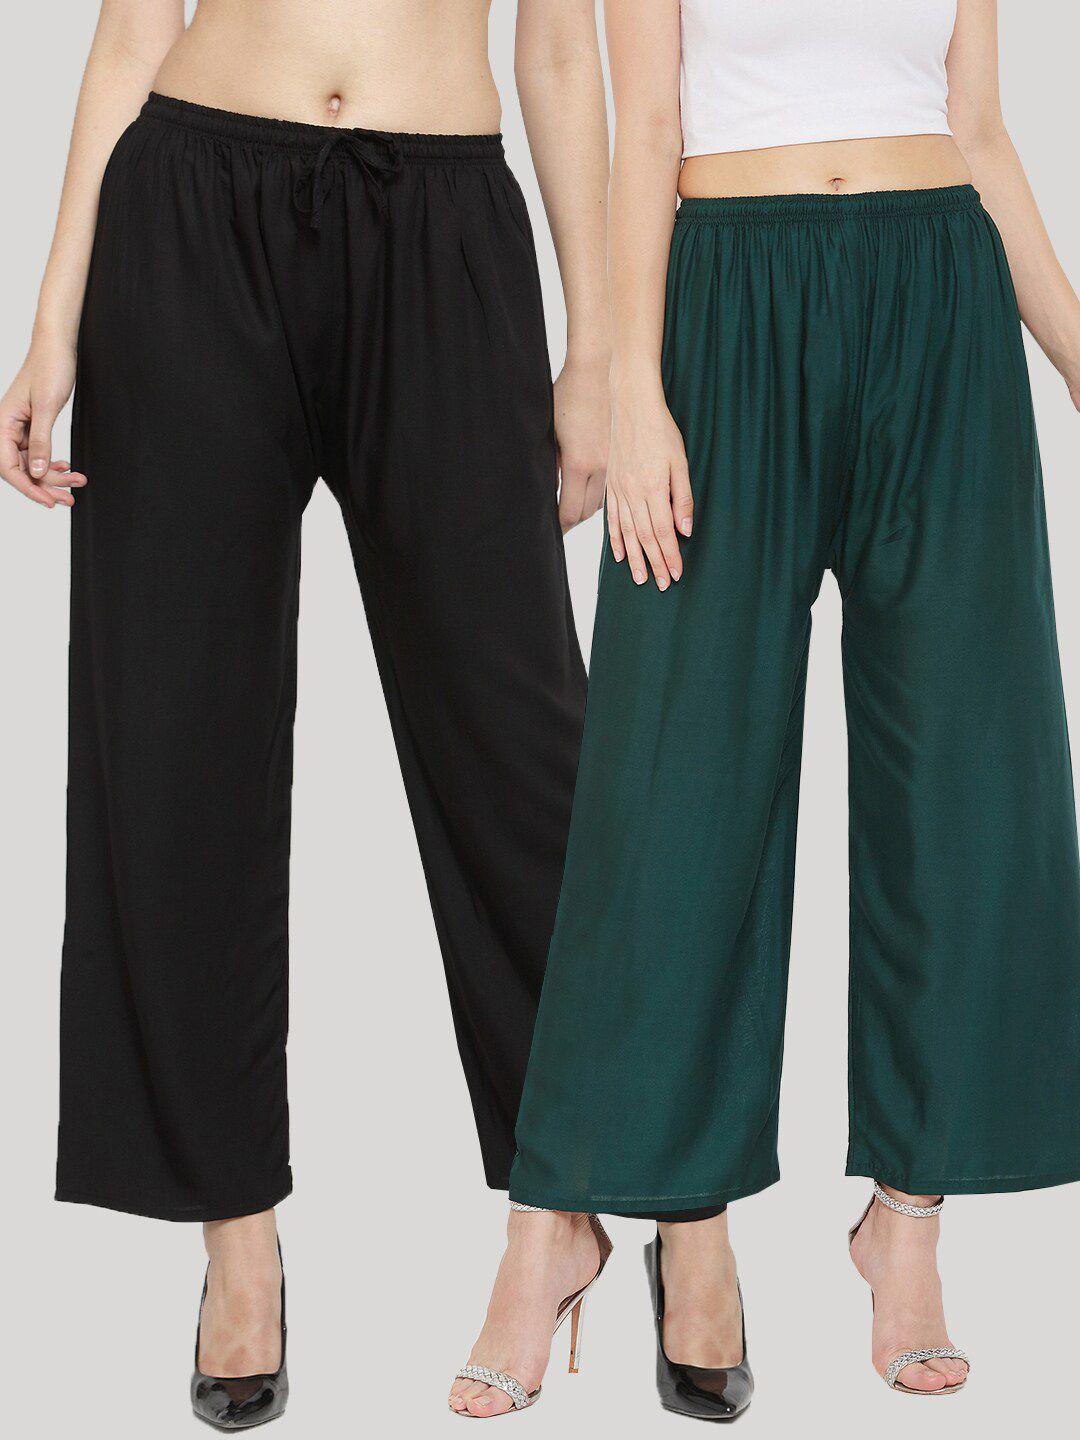 clora creation women pack of 2 green & black solid palazzos